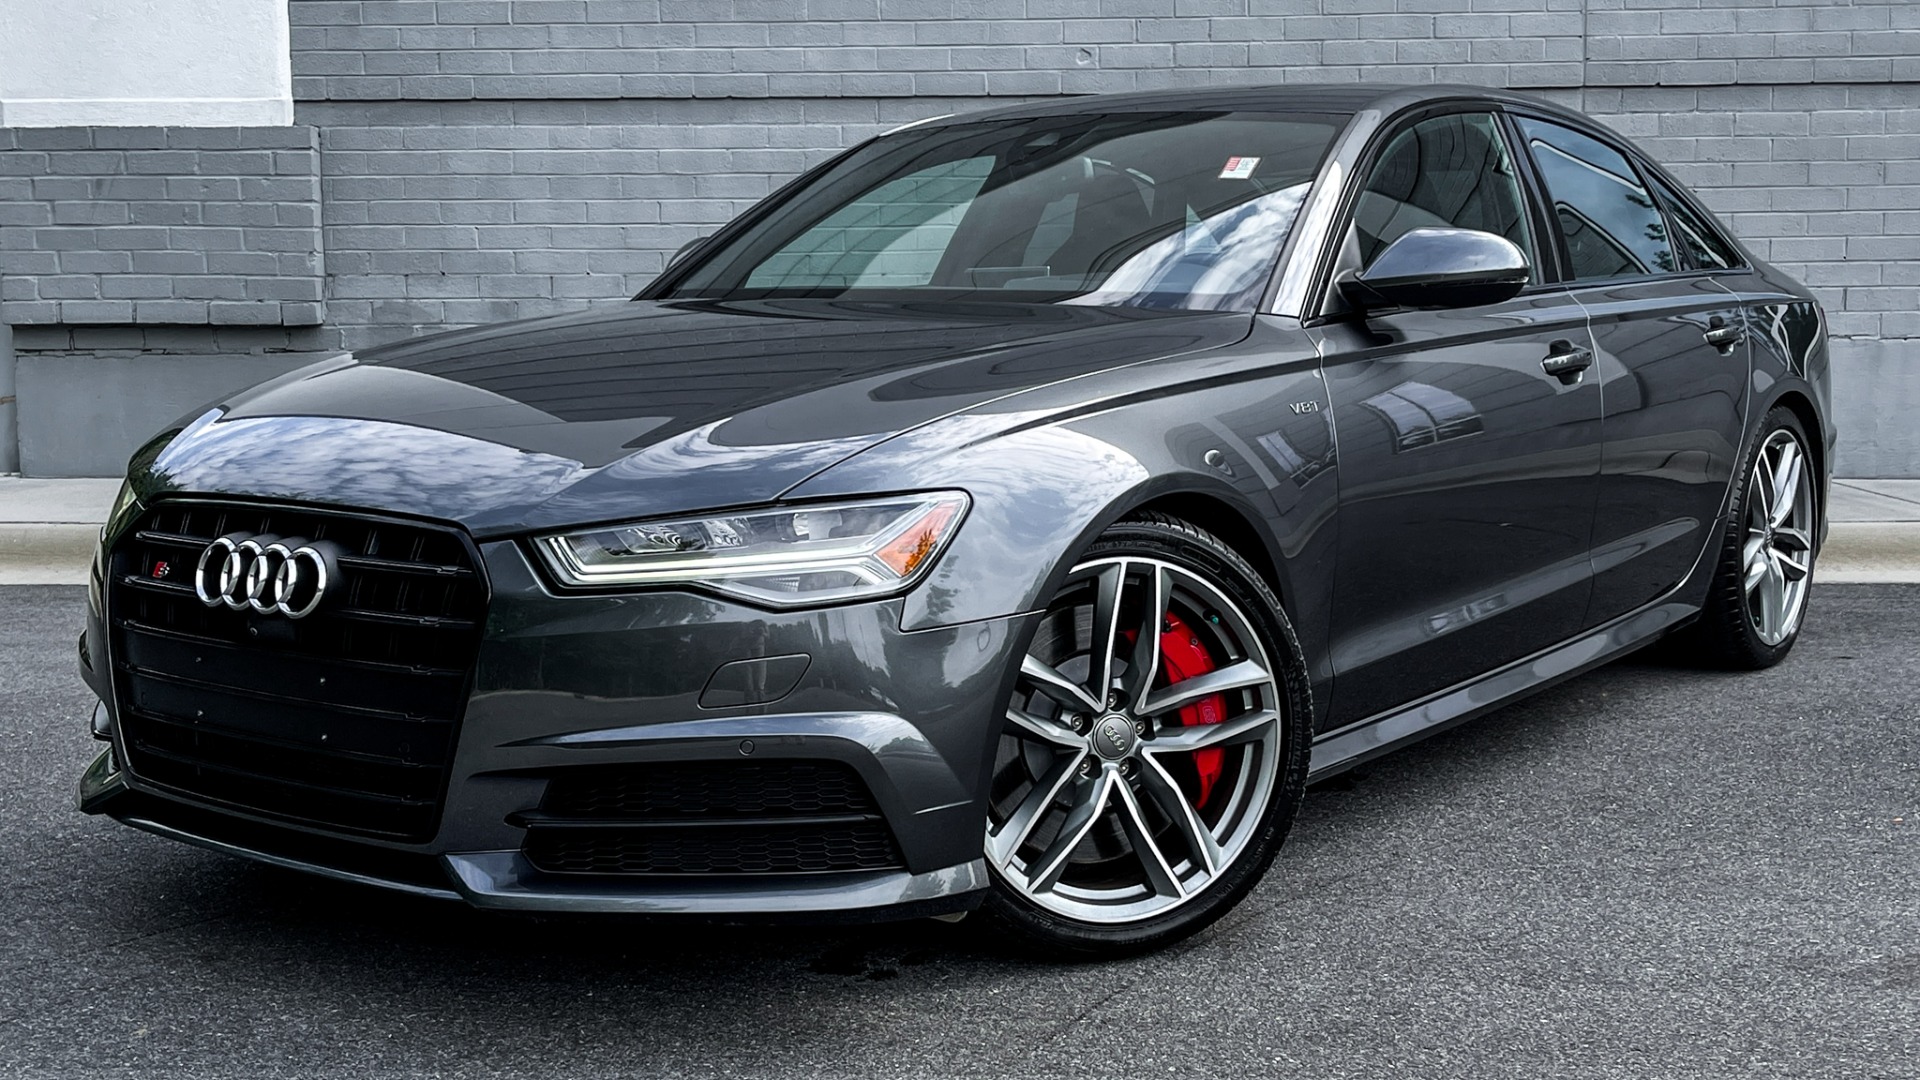 Used 2018 Audi S6 PRESTIGE / S SPORT / BLACK OPTIC / 4.0L V8 TURBO / COLD WEATHER PACKAGE for sale Sold at Formula Imports in Charlotte NC 28227 57